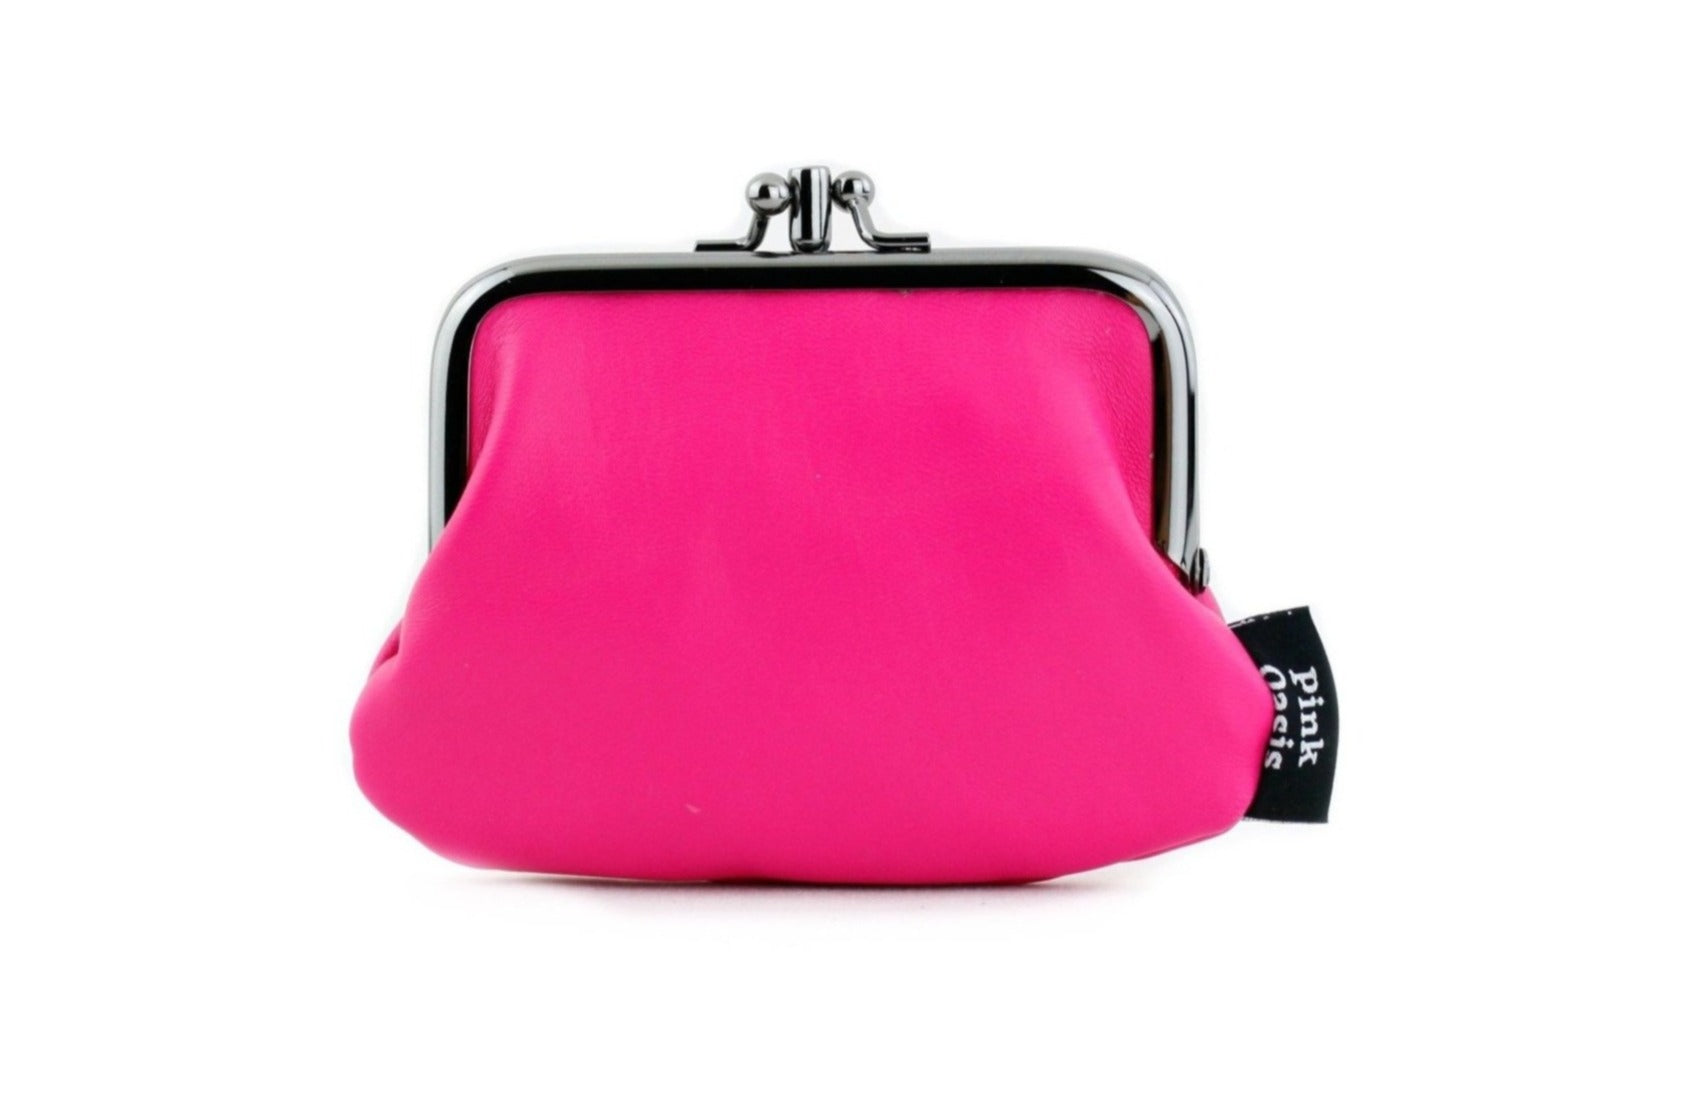 Syga PU Leather Cute Dotted Hanging Wallet Pink Black Online in India, Buy  at Best Price from Firstcry.com - 10042210